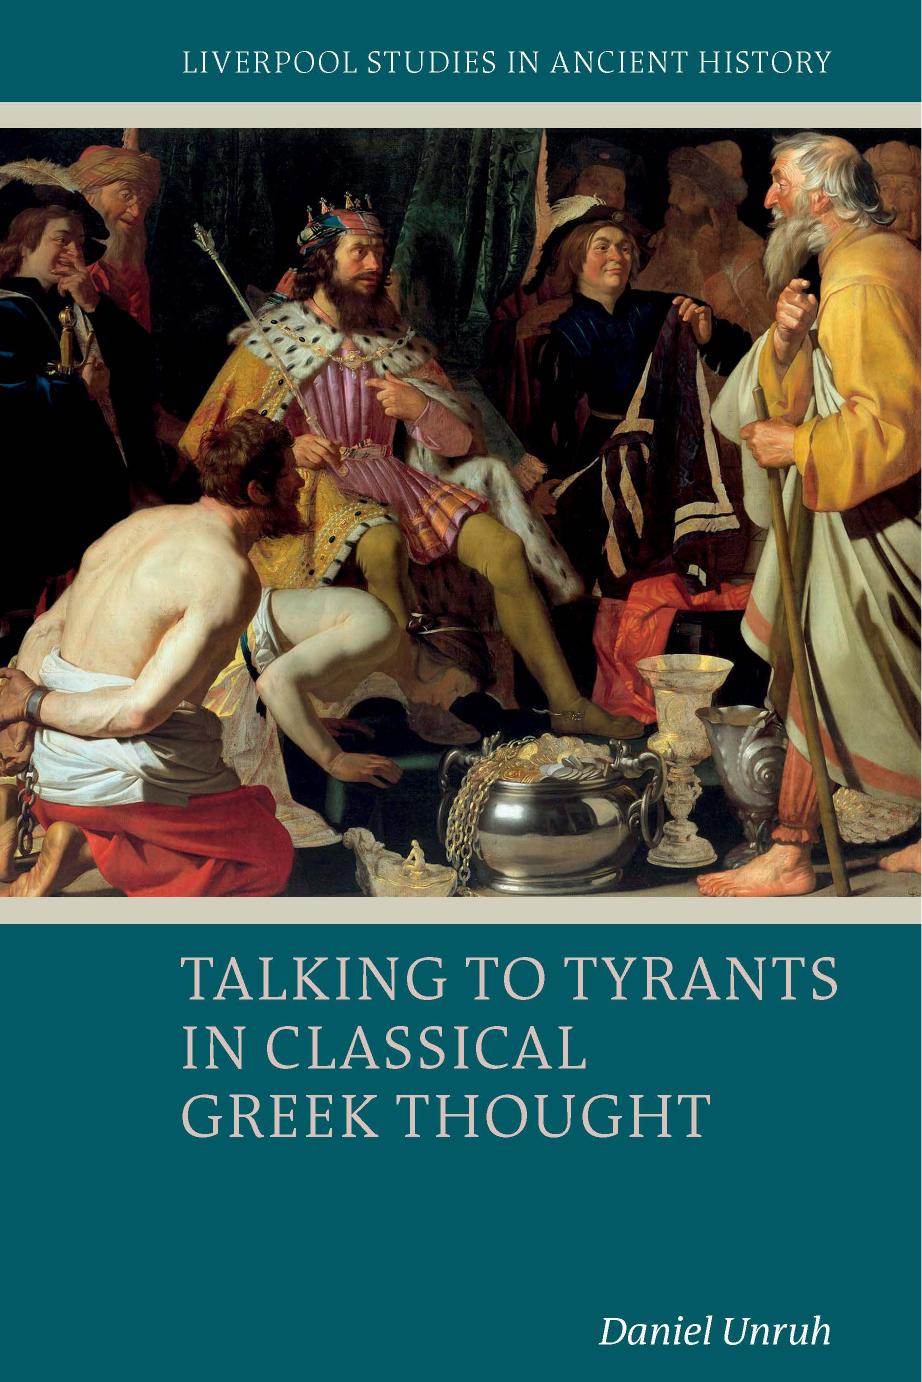 Talking to Tyrants in Classical Greek Thought (Liverpool Studies in Ancient History) by Daniel Unruh